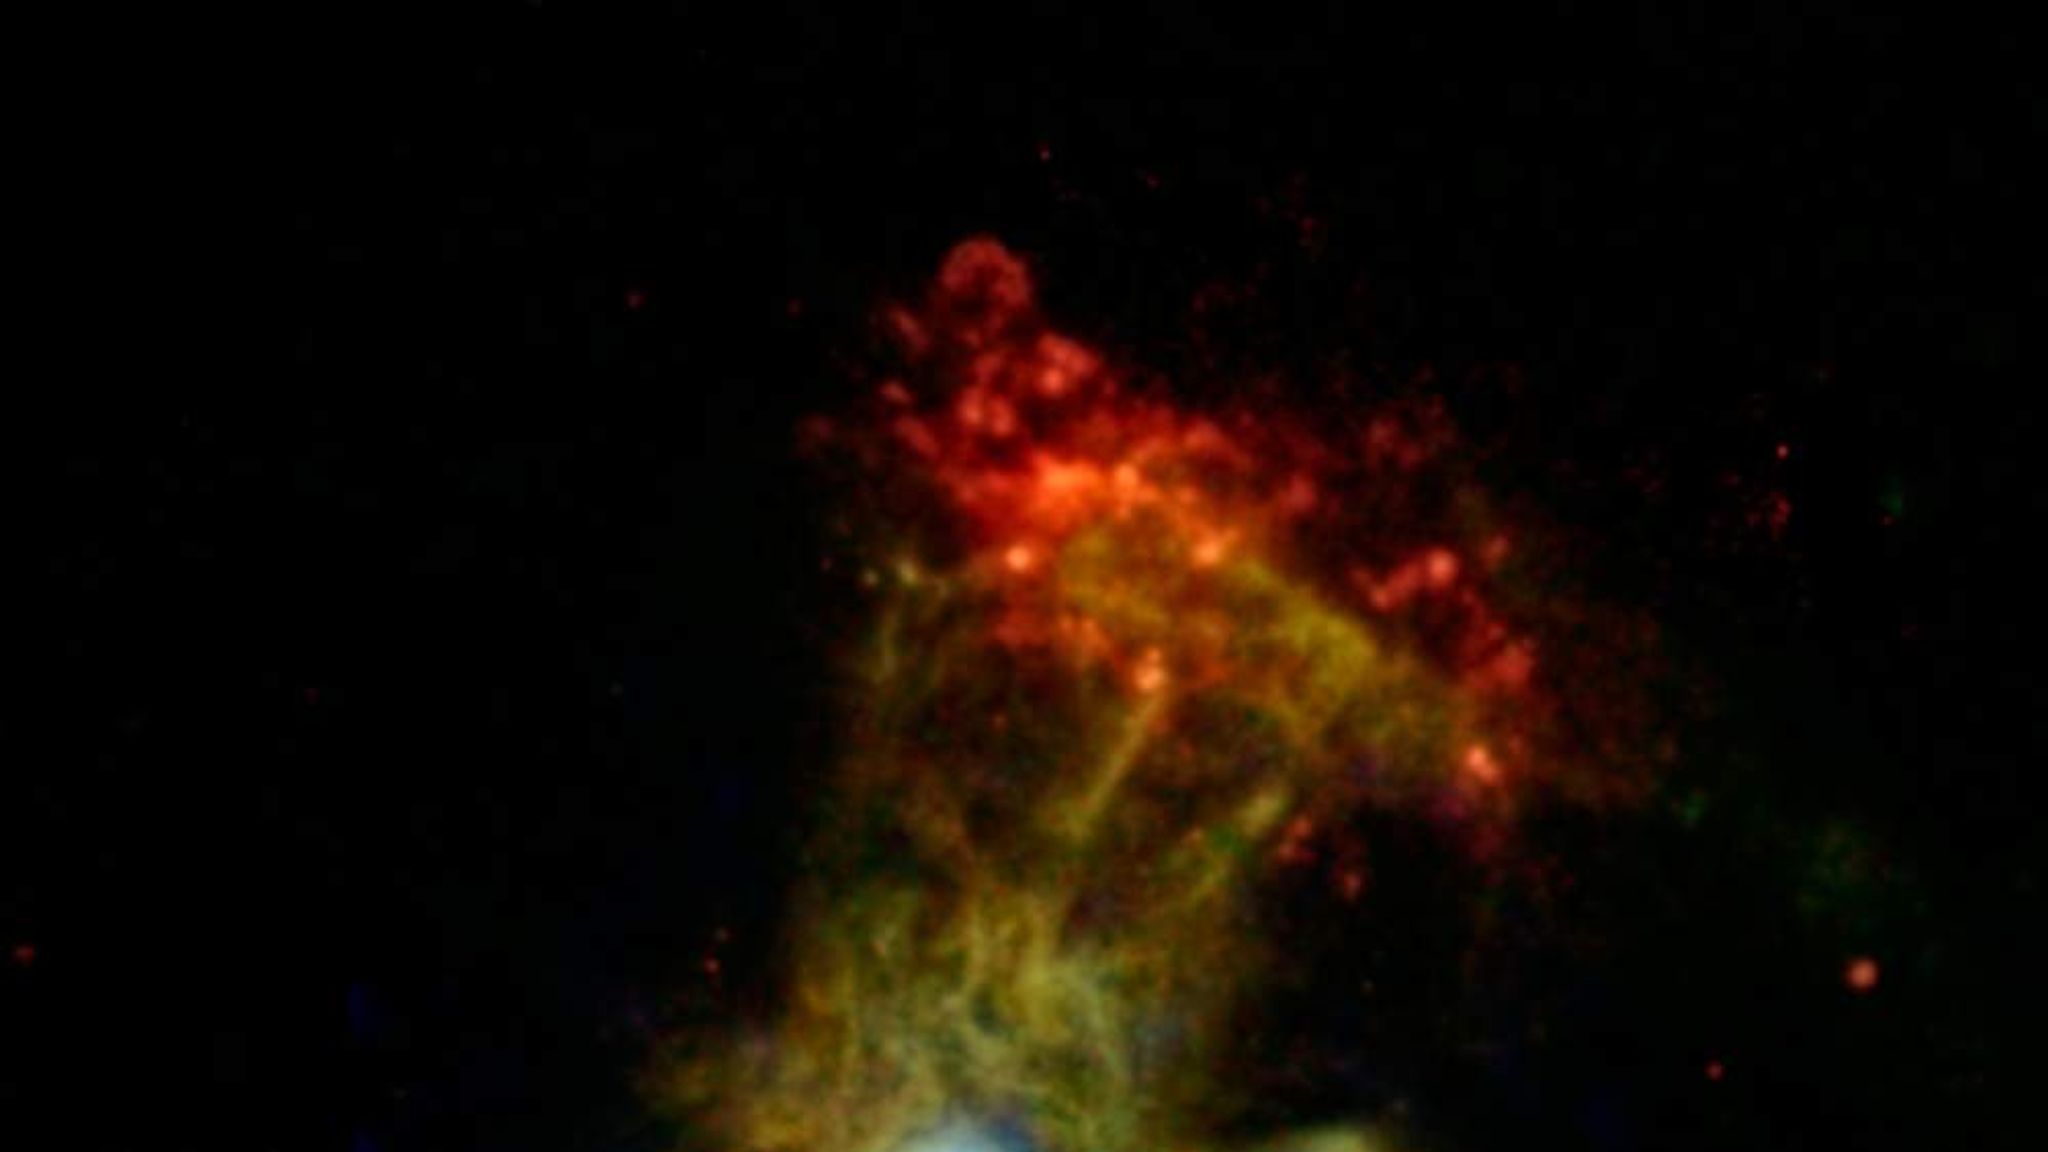 New 'Hand Of God' Picture Taken By Nasa | US News | Sky News